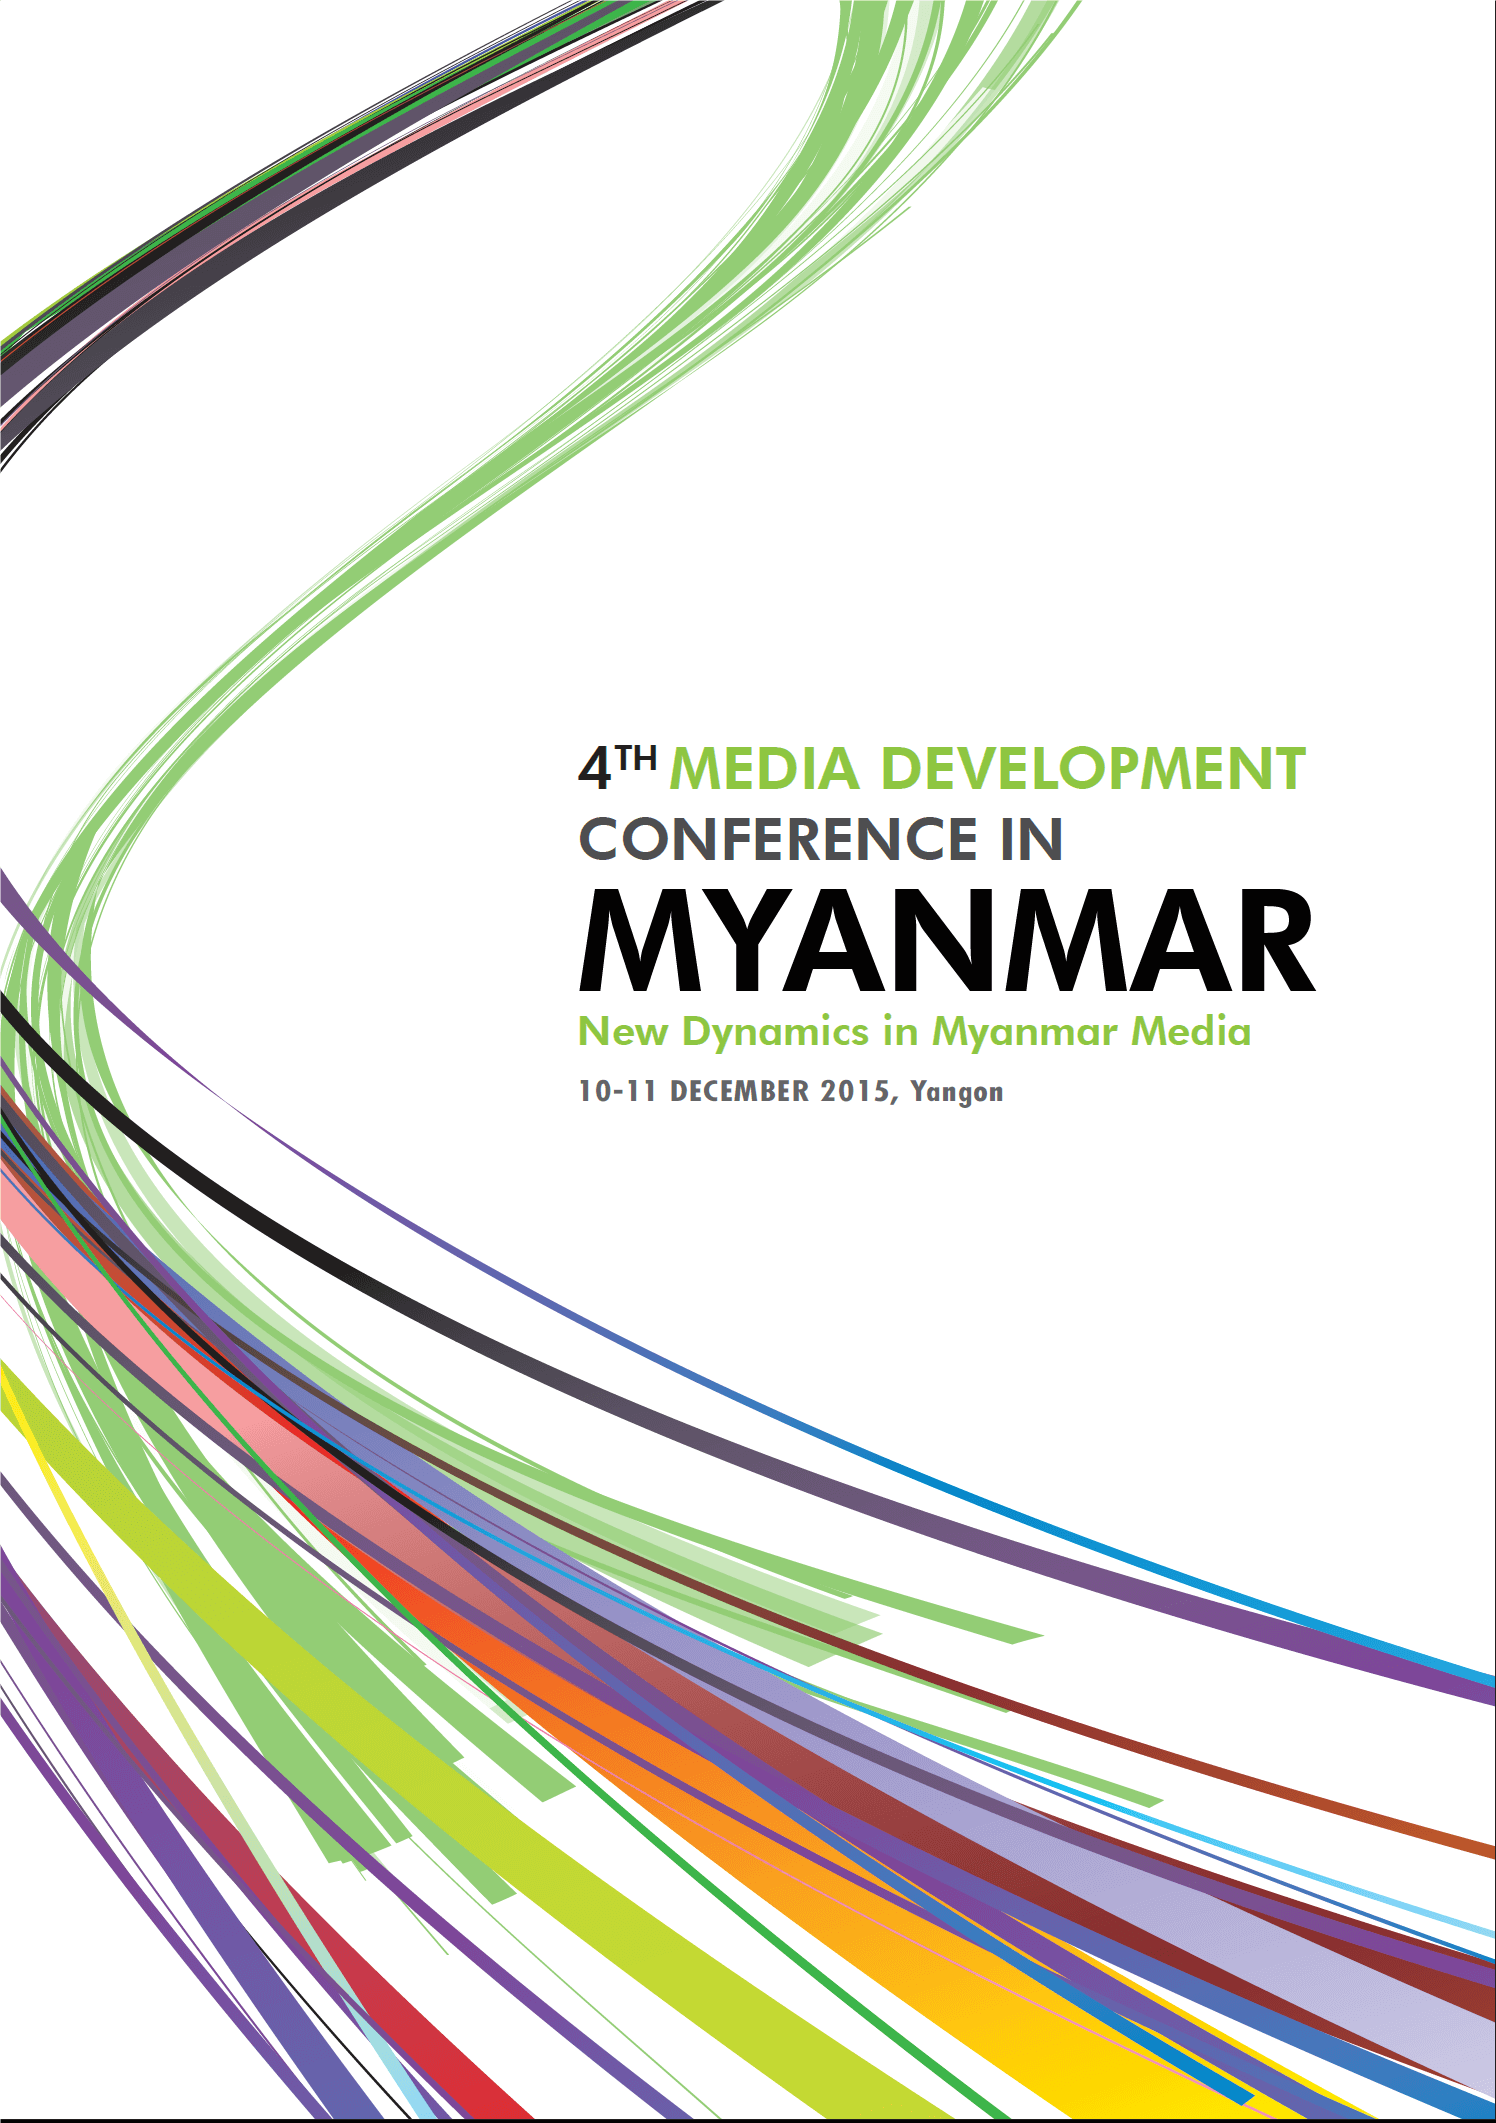 New dynamics in Myanmar media - 4th conference report